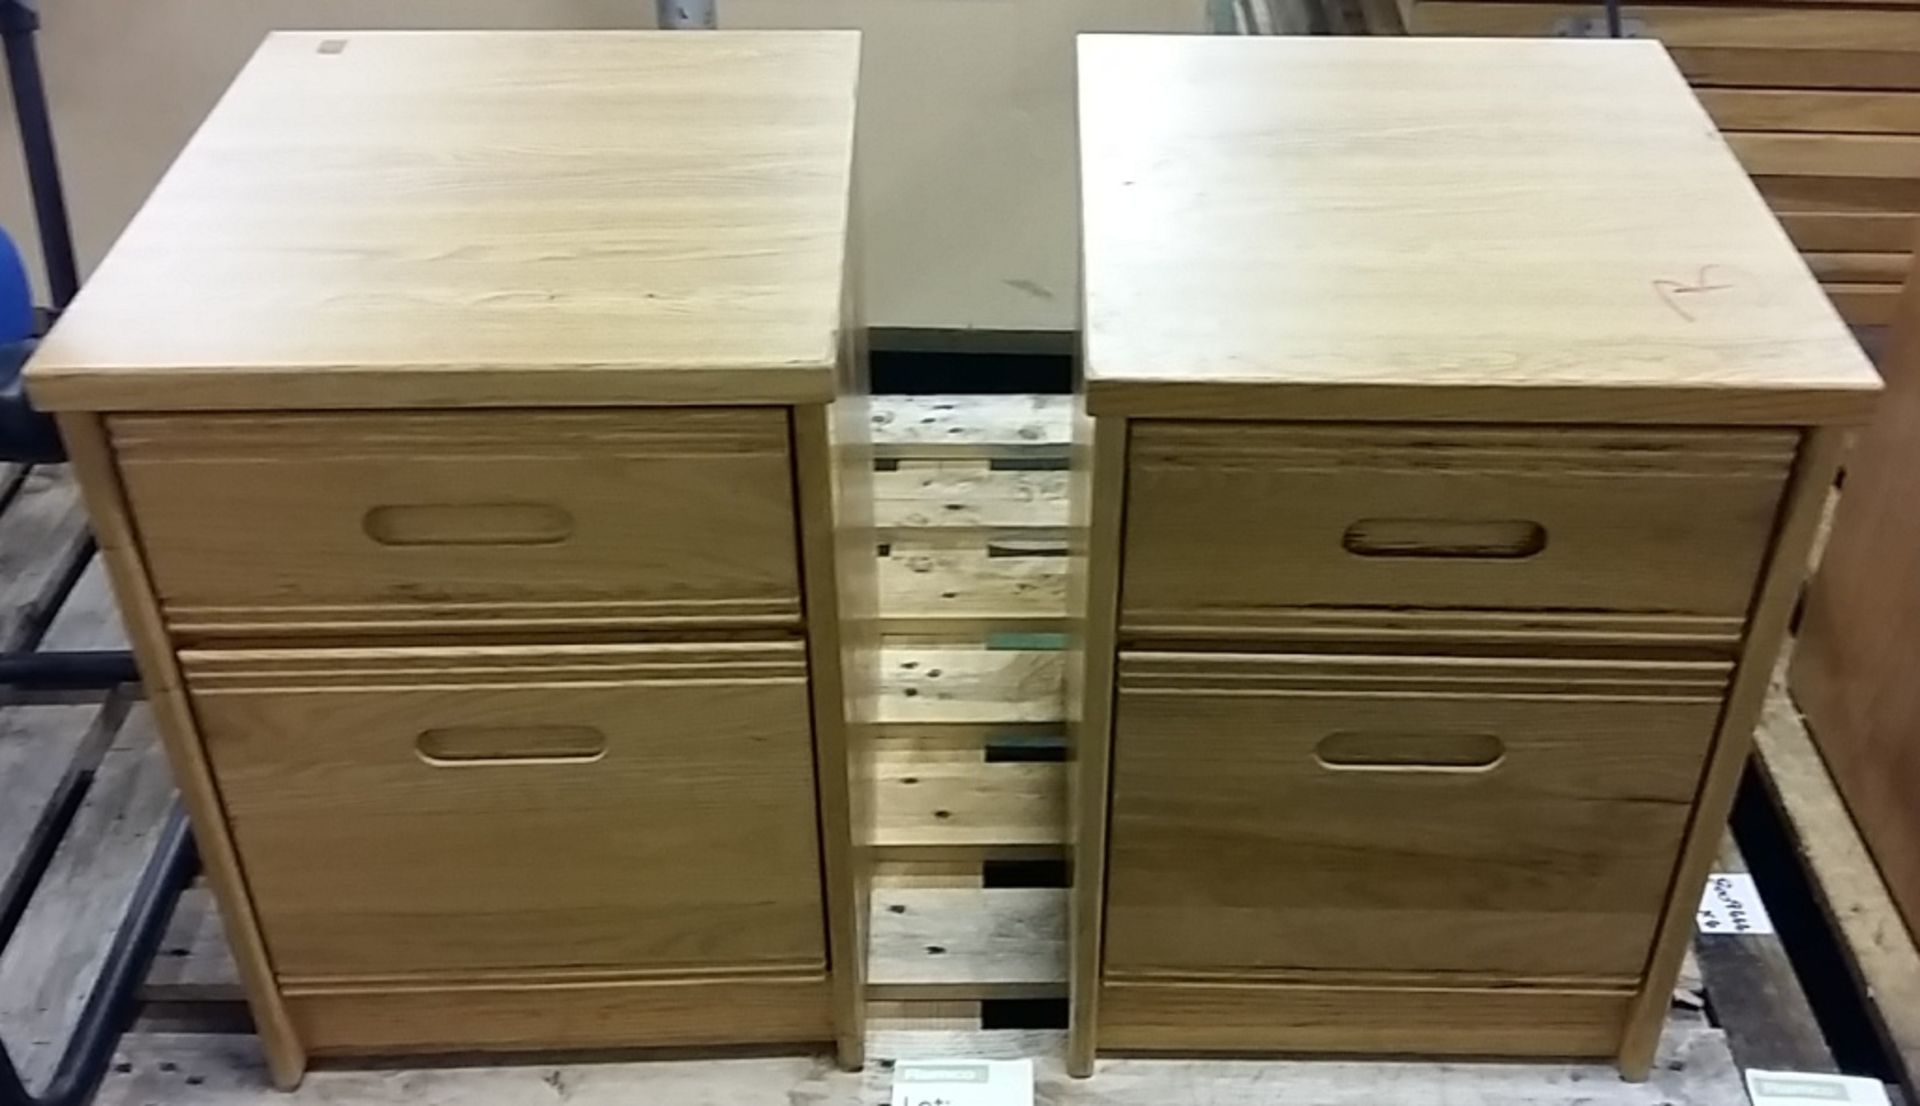 2x 2 drawer wooden cabinets